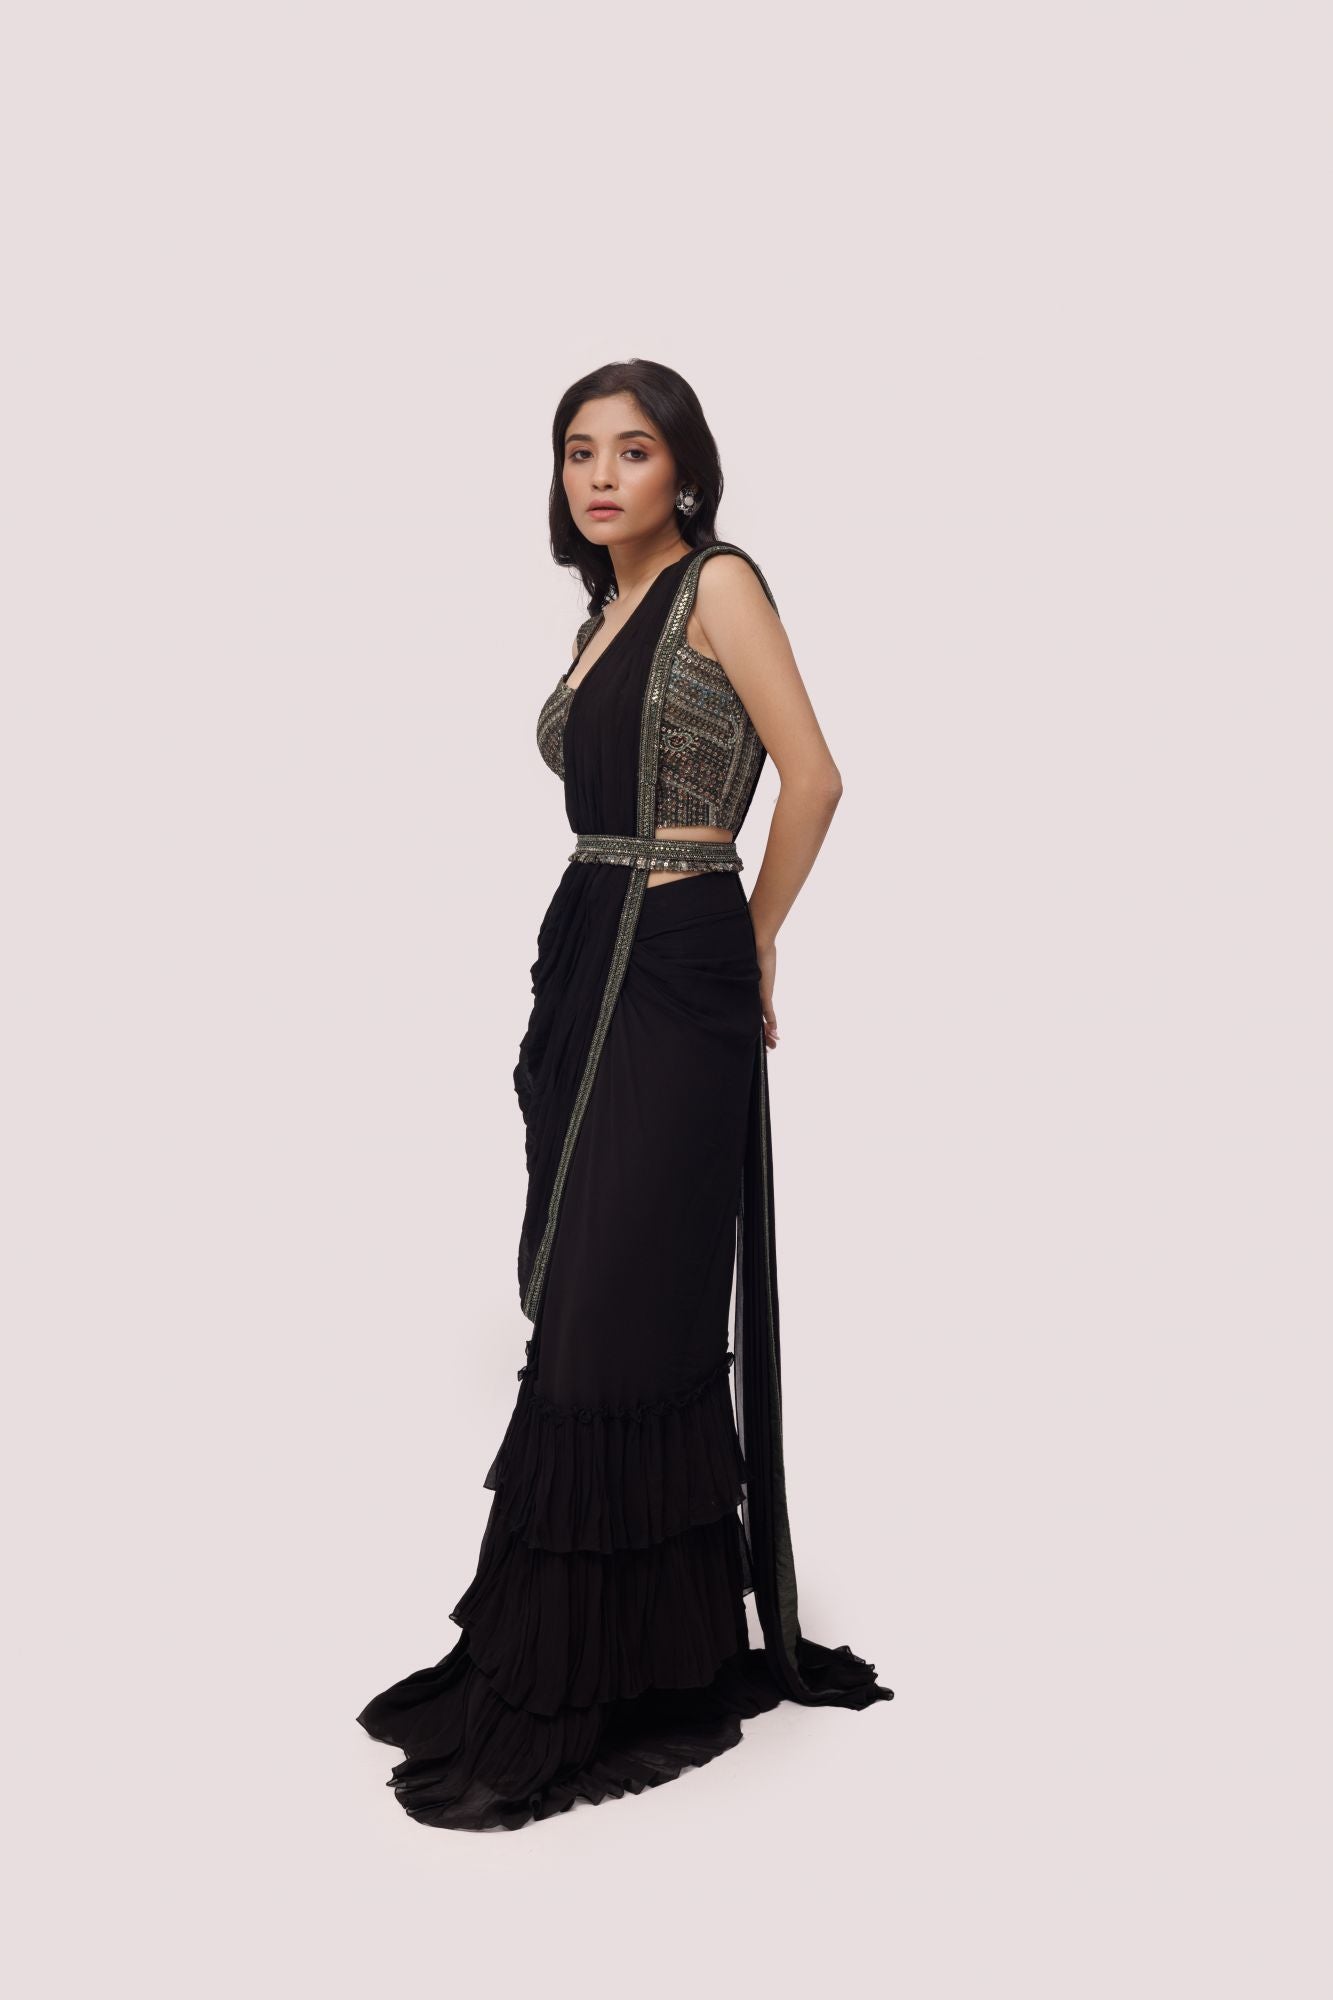 Shop black ruffle pre stiched saree set. Make a fashion statement on festive occasions and weddings with designer sarees, designer suits, Indian dresses, Anarkali suits, palazzo suits, designer gowns, sharara suits, and embroidered sarees from Pure Elegance Indian fashion store in the USA.